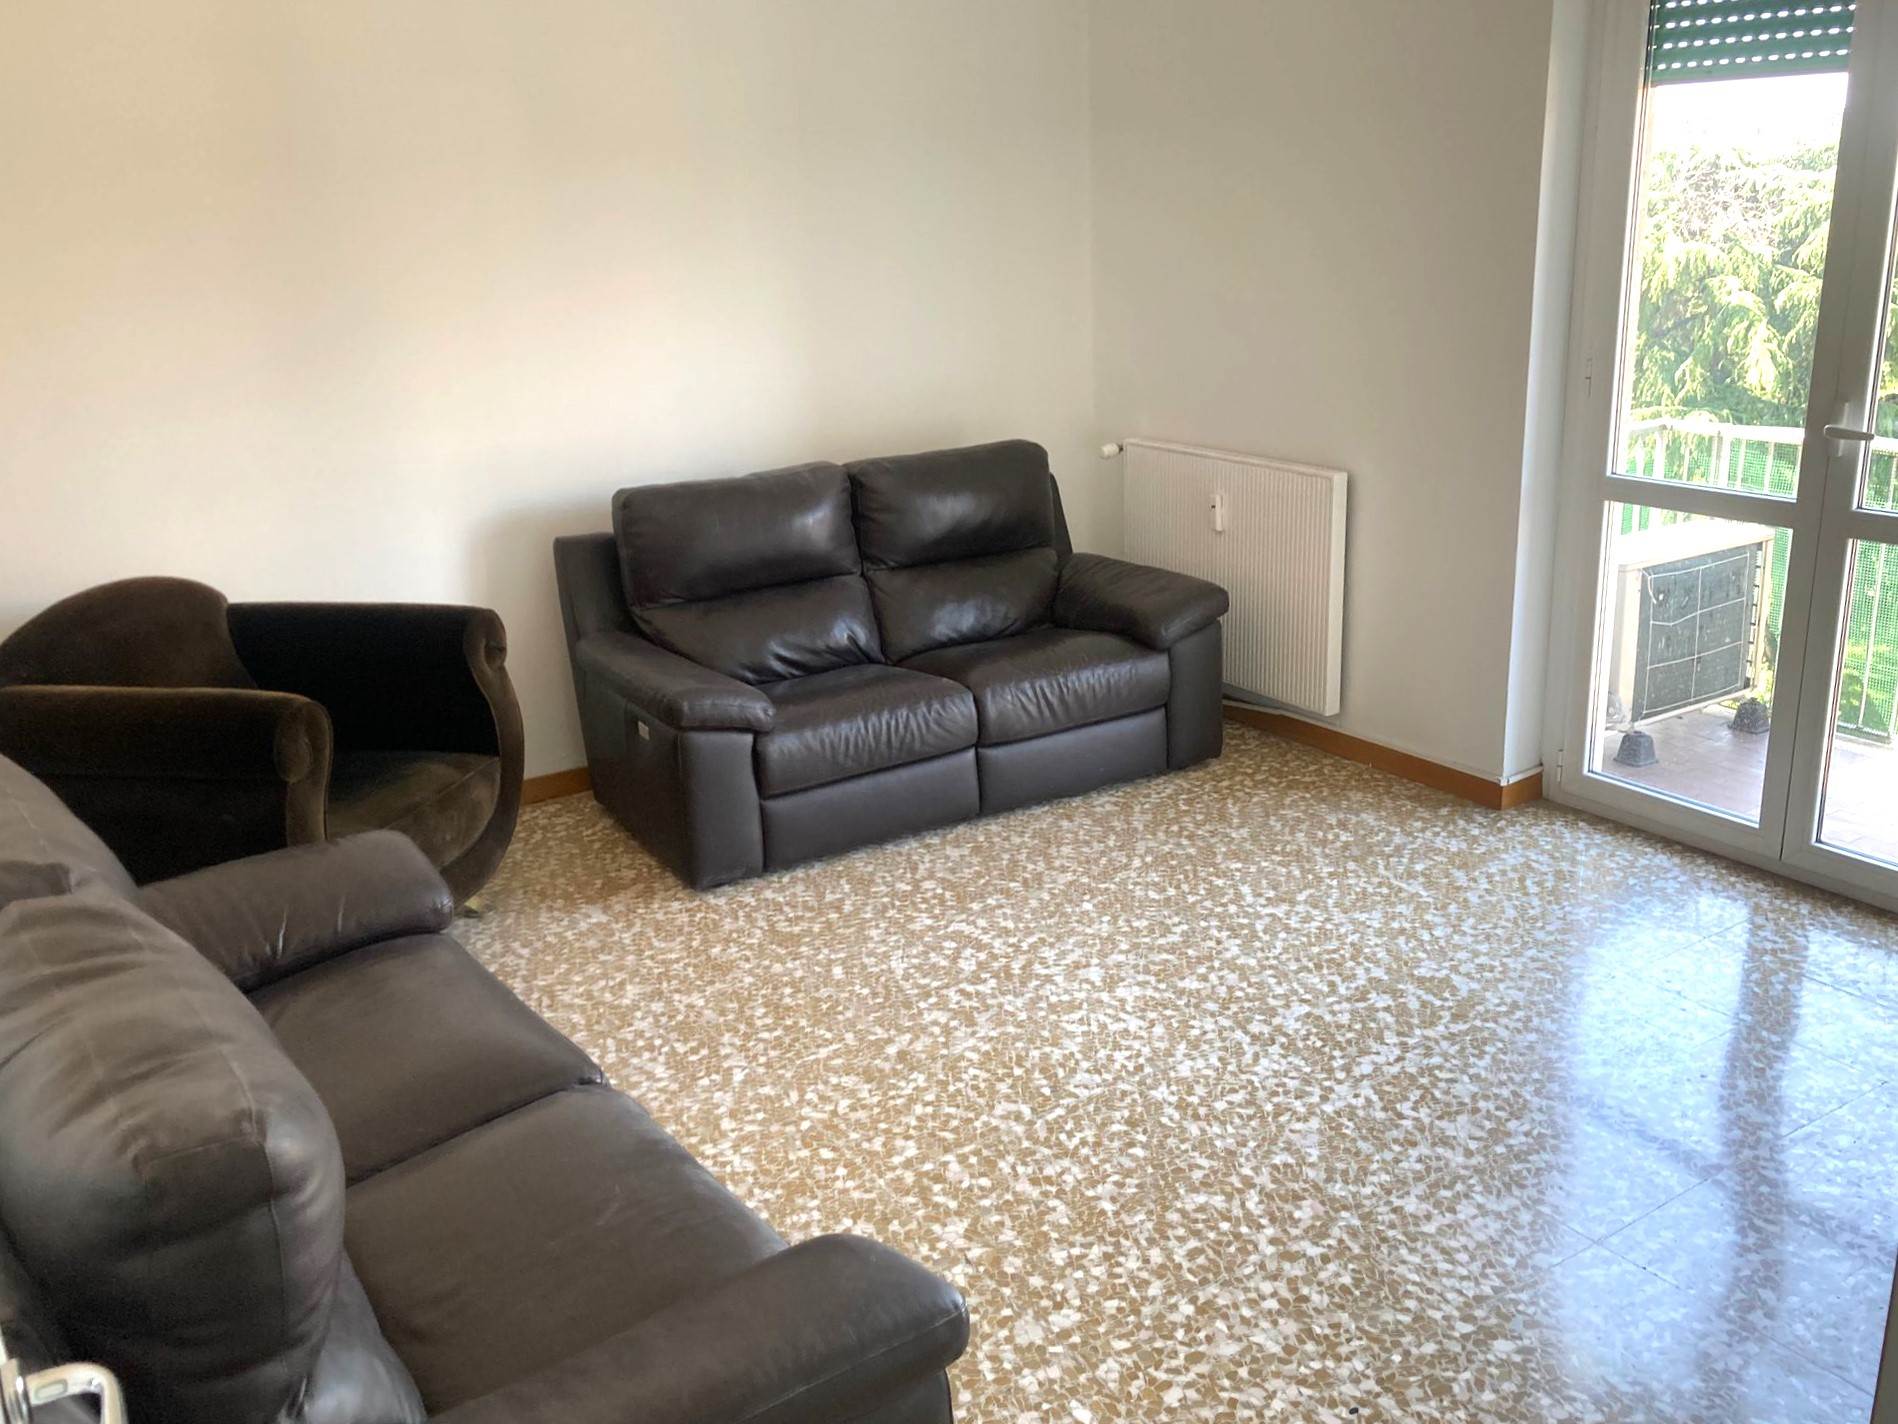 CINISELLO BALSAMO, Apartment for sale of 70 Sq. mt., Good condition, Heating Centralized, Energetic class: G, Epi: 175 kwh/m2 year, placed at 4° on 5,